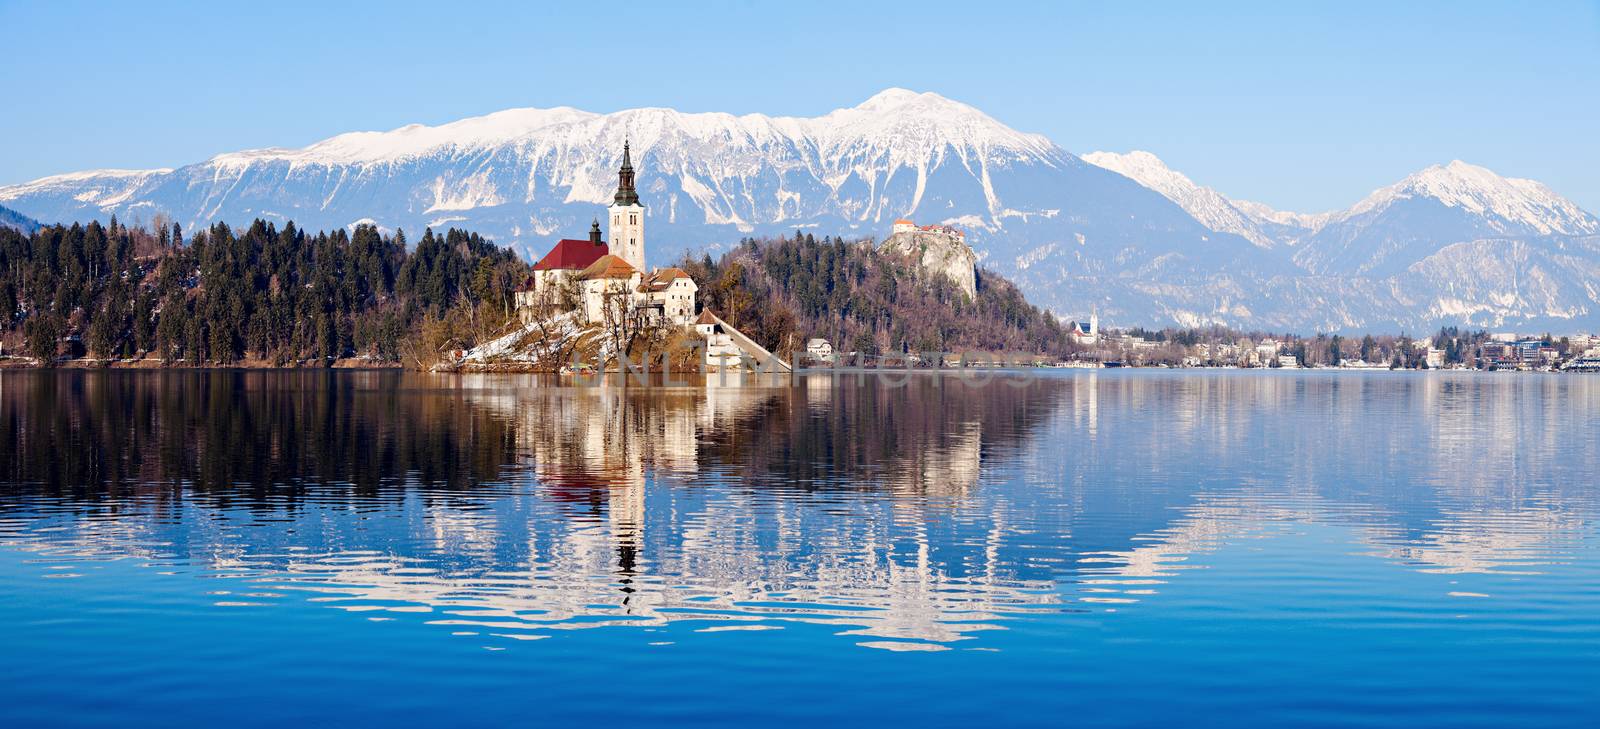 Church of the Assumption on Lake Bled. Bled, Slovenia